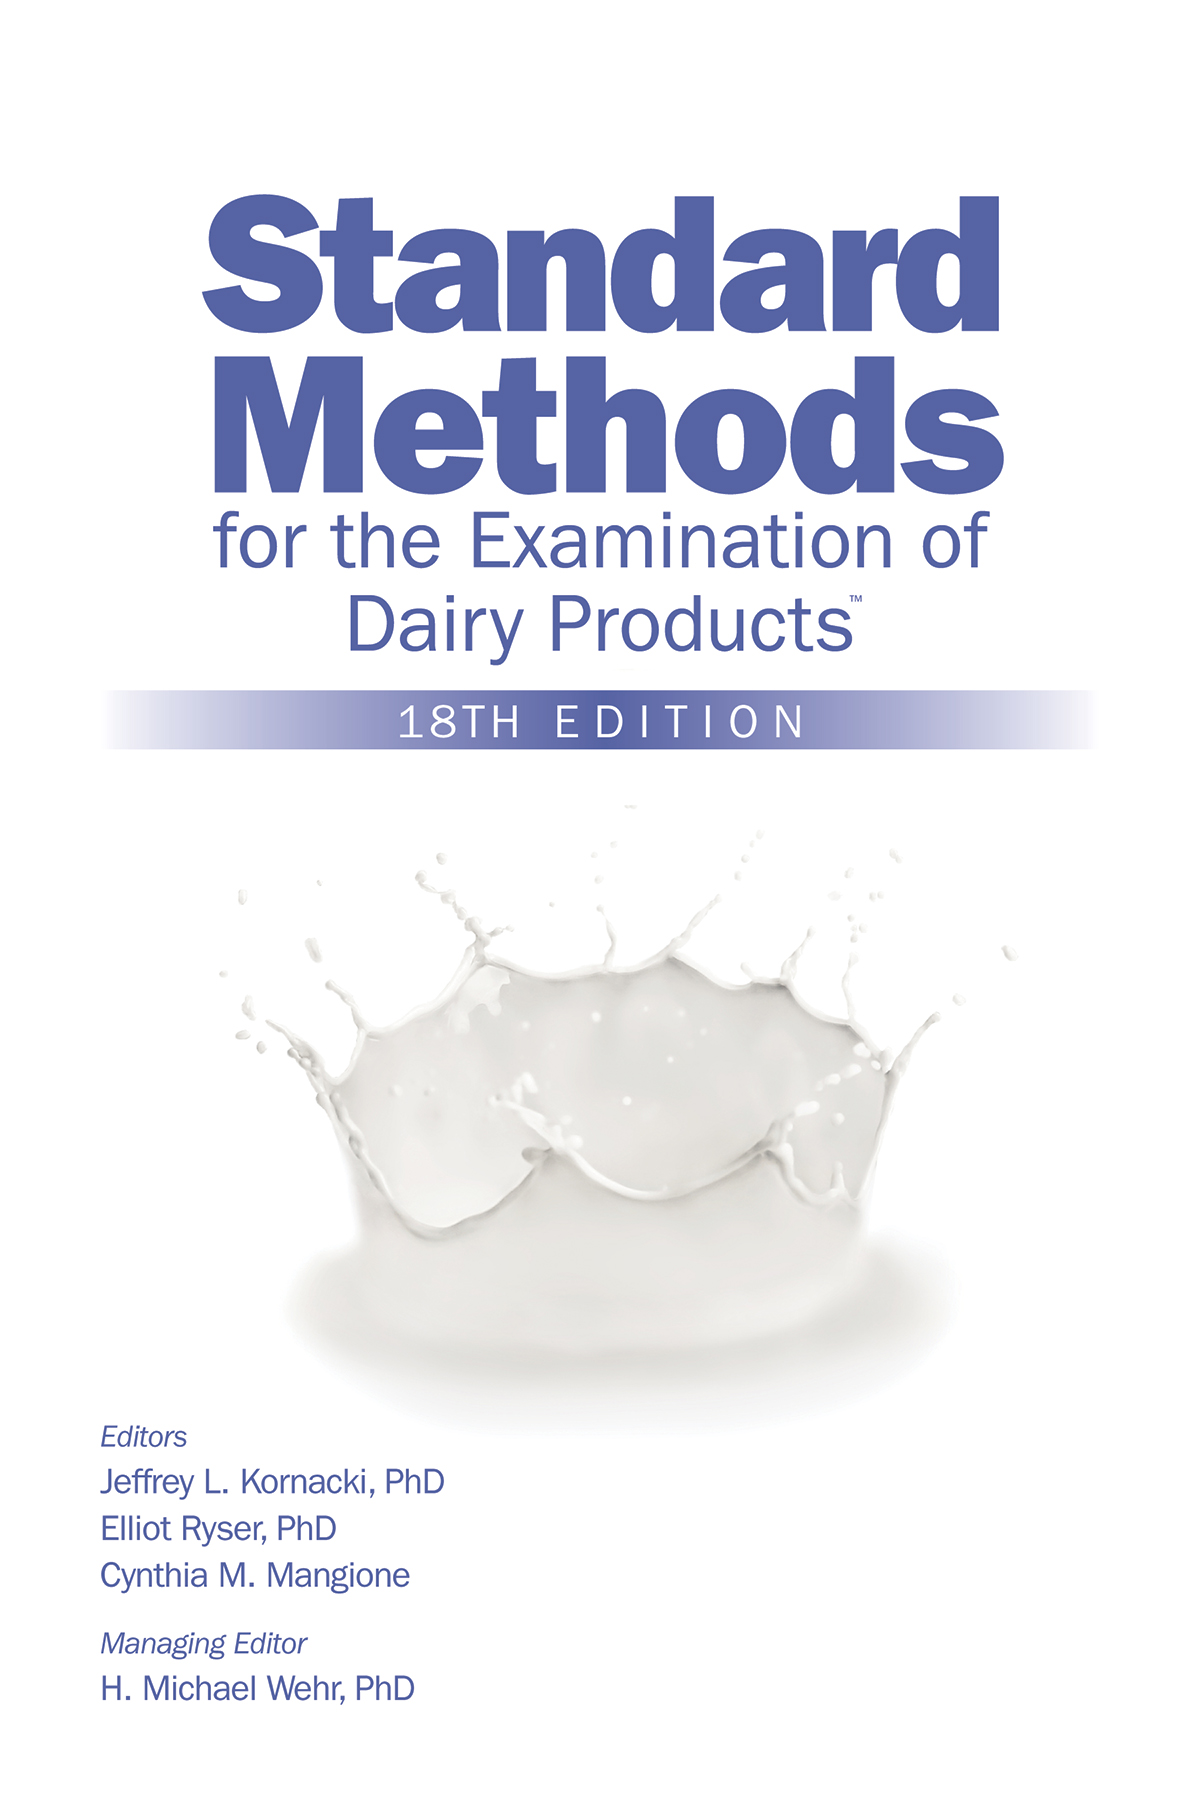 Standard Methods for the Examination of Dairy Products, 18th